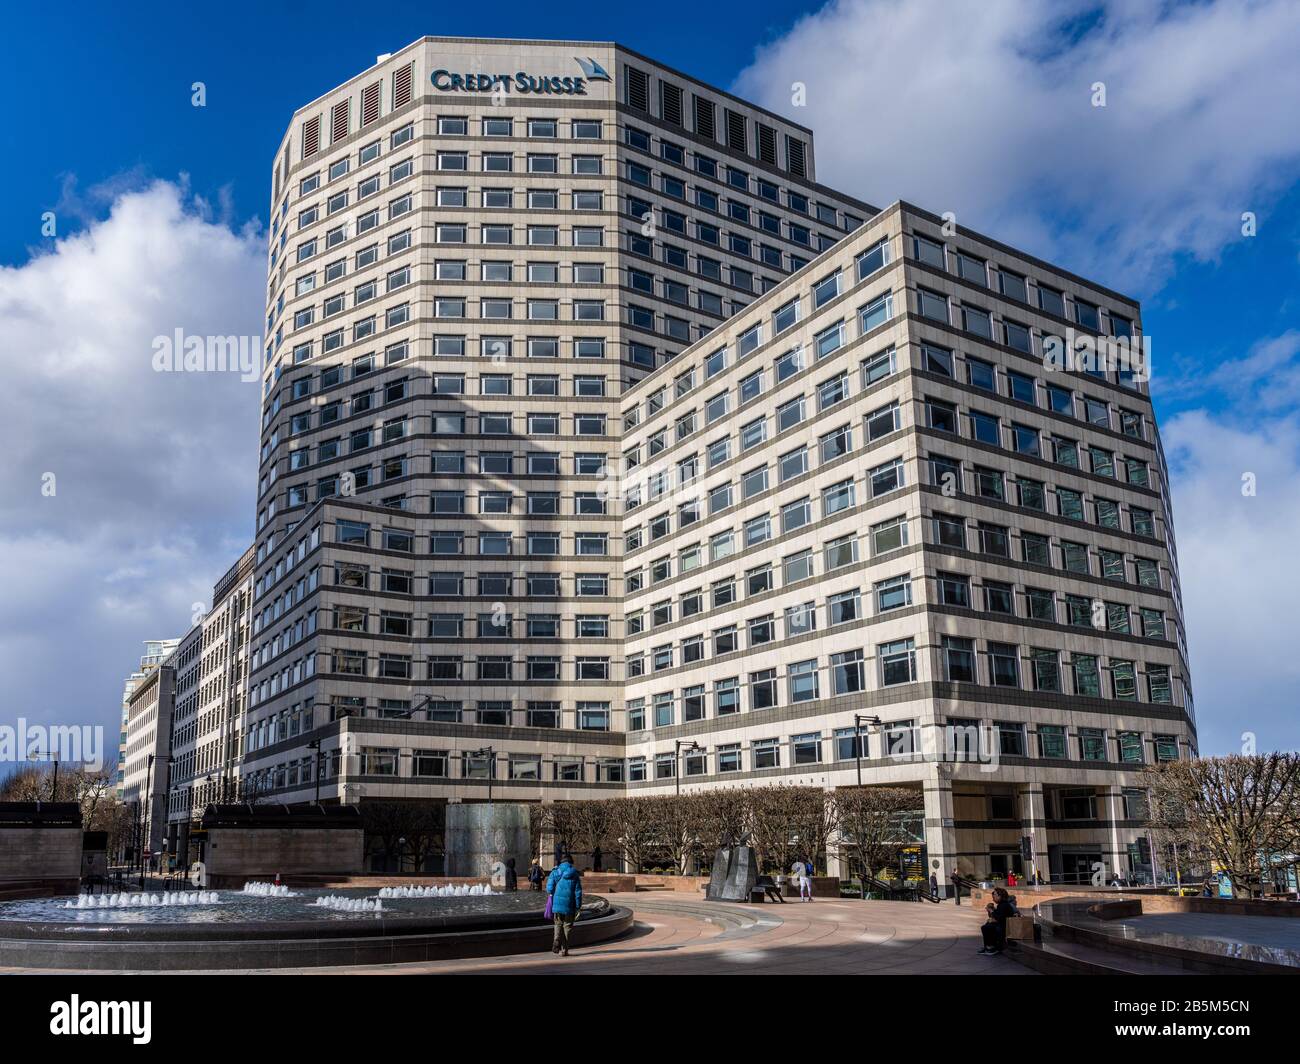 Credit Suisse Canary Wharf London. Credit Suisse UK Offices in Canary Wharf. Stock Photo